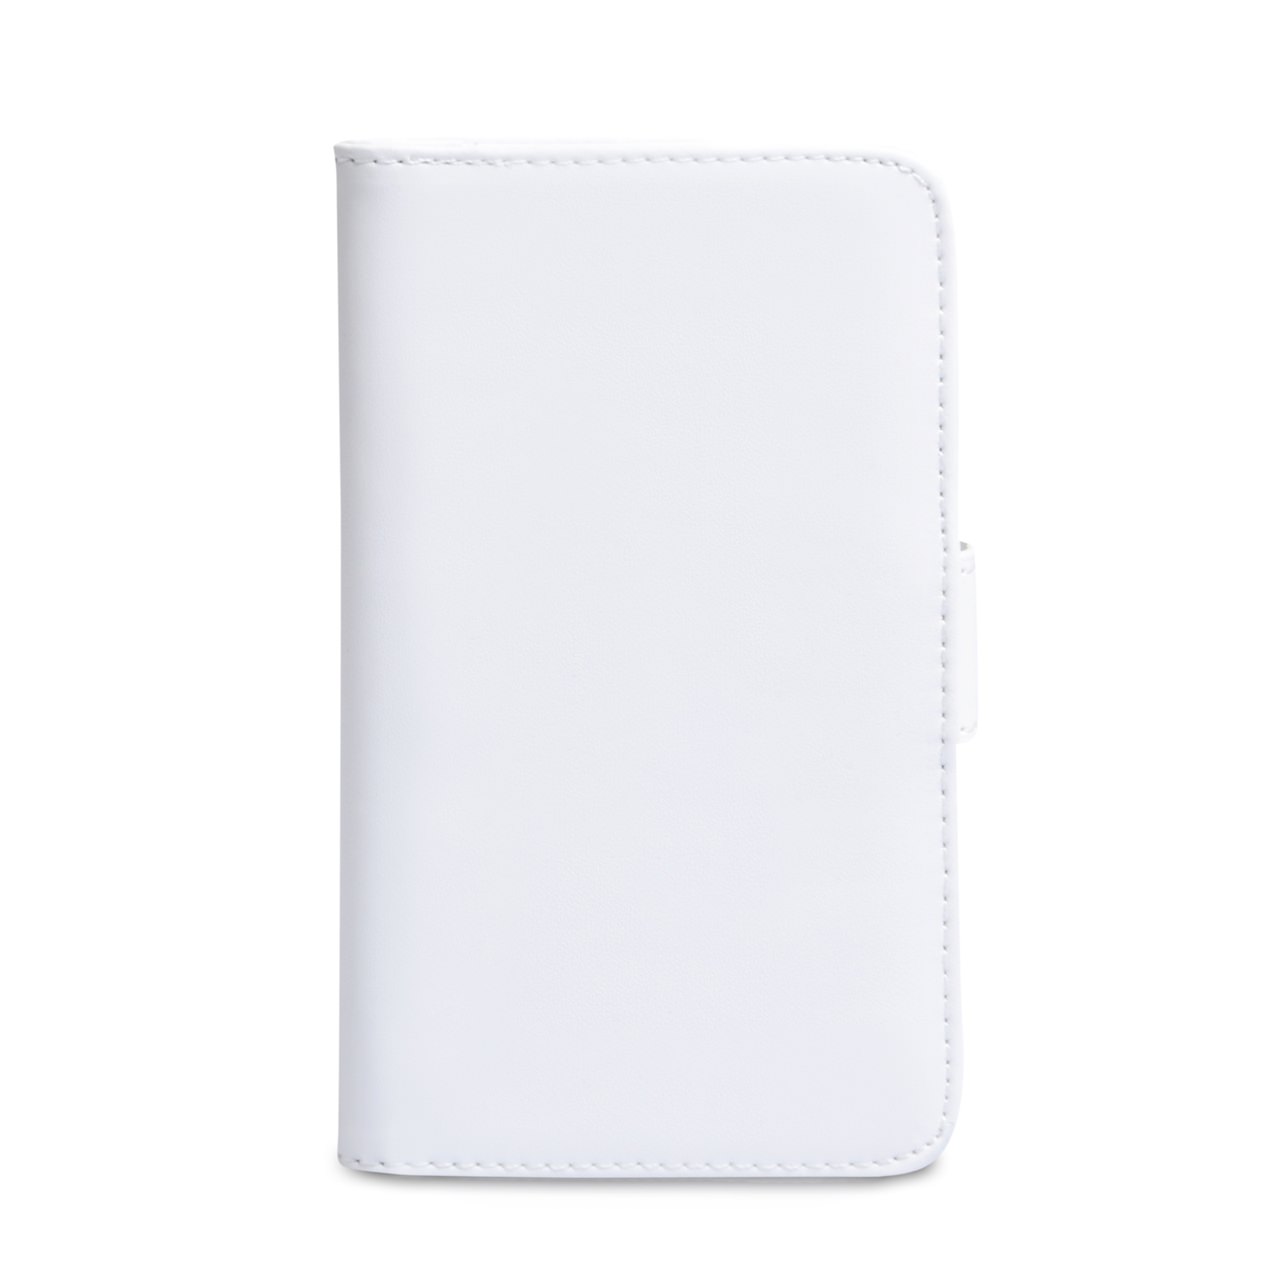 YouSave Accessories Nokia Lumia 720 Leather Effect Wallet Case - White